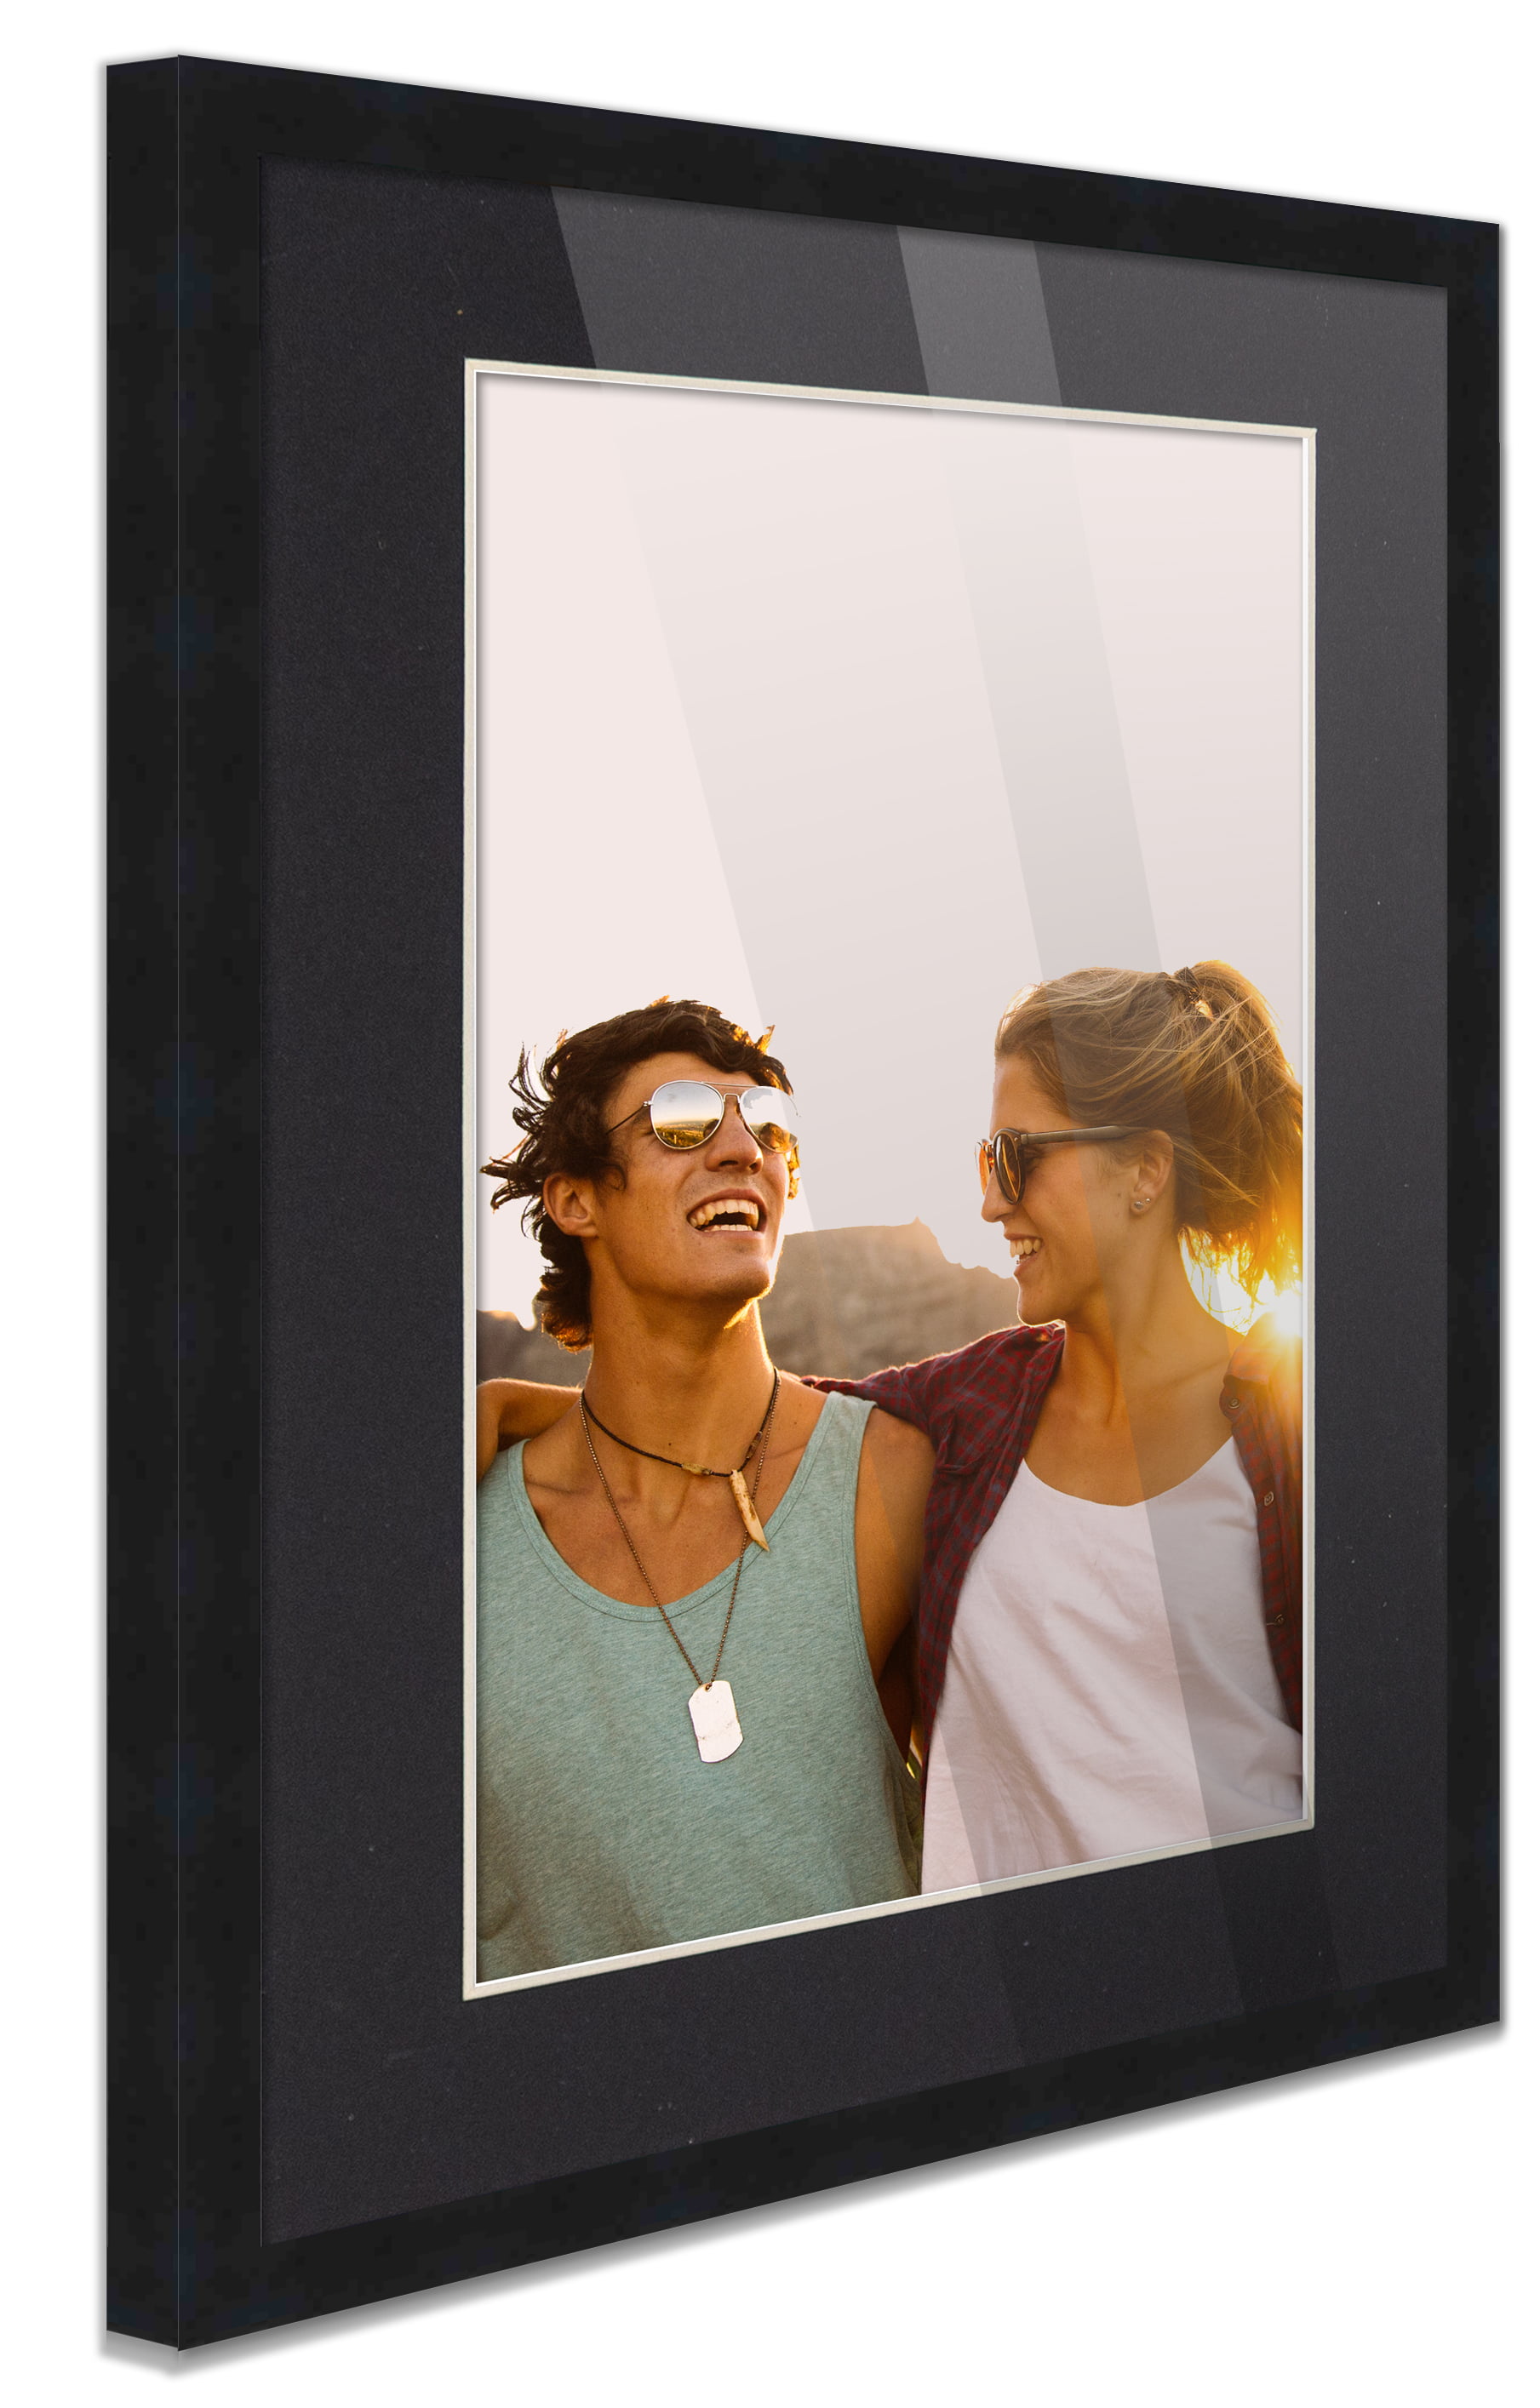 13x16 Black Picture Frame with 10.5x13.5 Black Mat Opening for 11x14 Image,  0.75 Inch Border, UV 